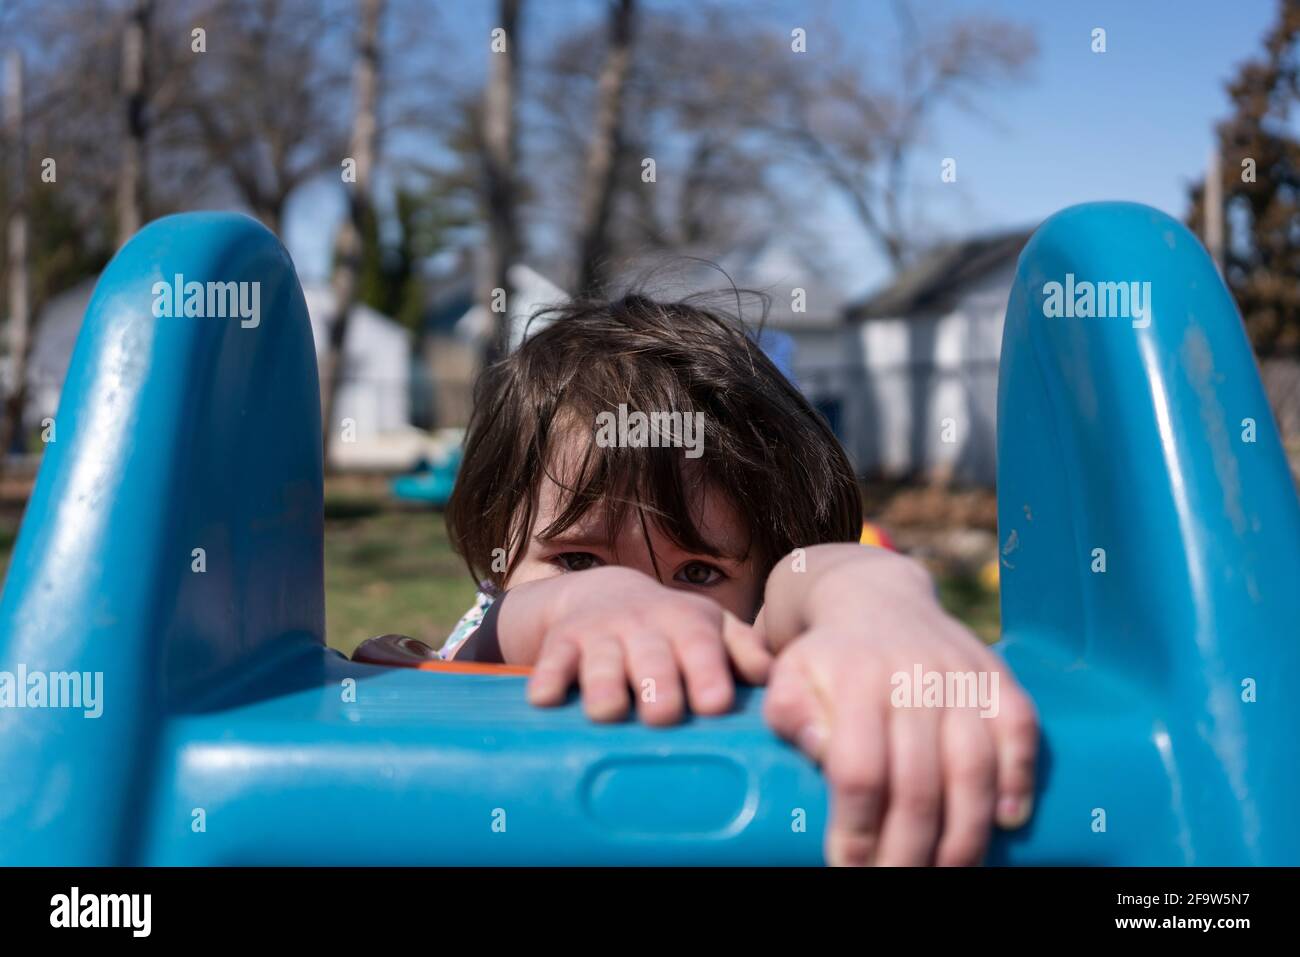 A toddler girl playing outside Stock Photo